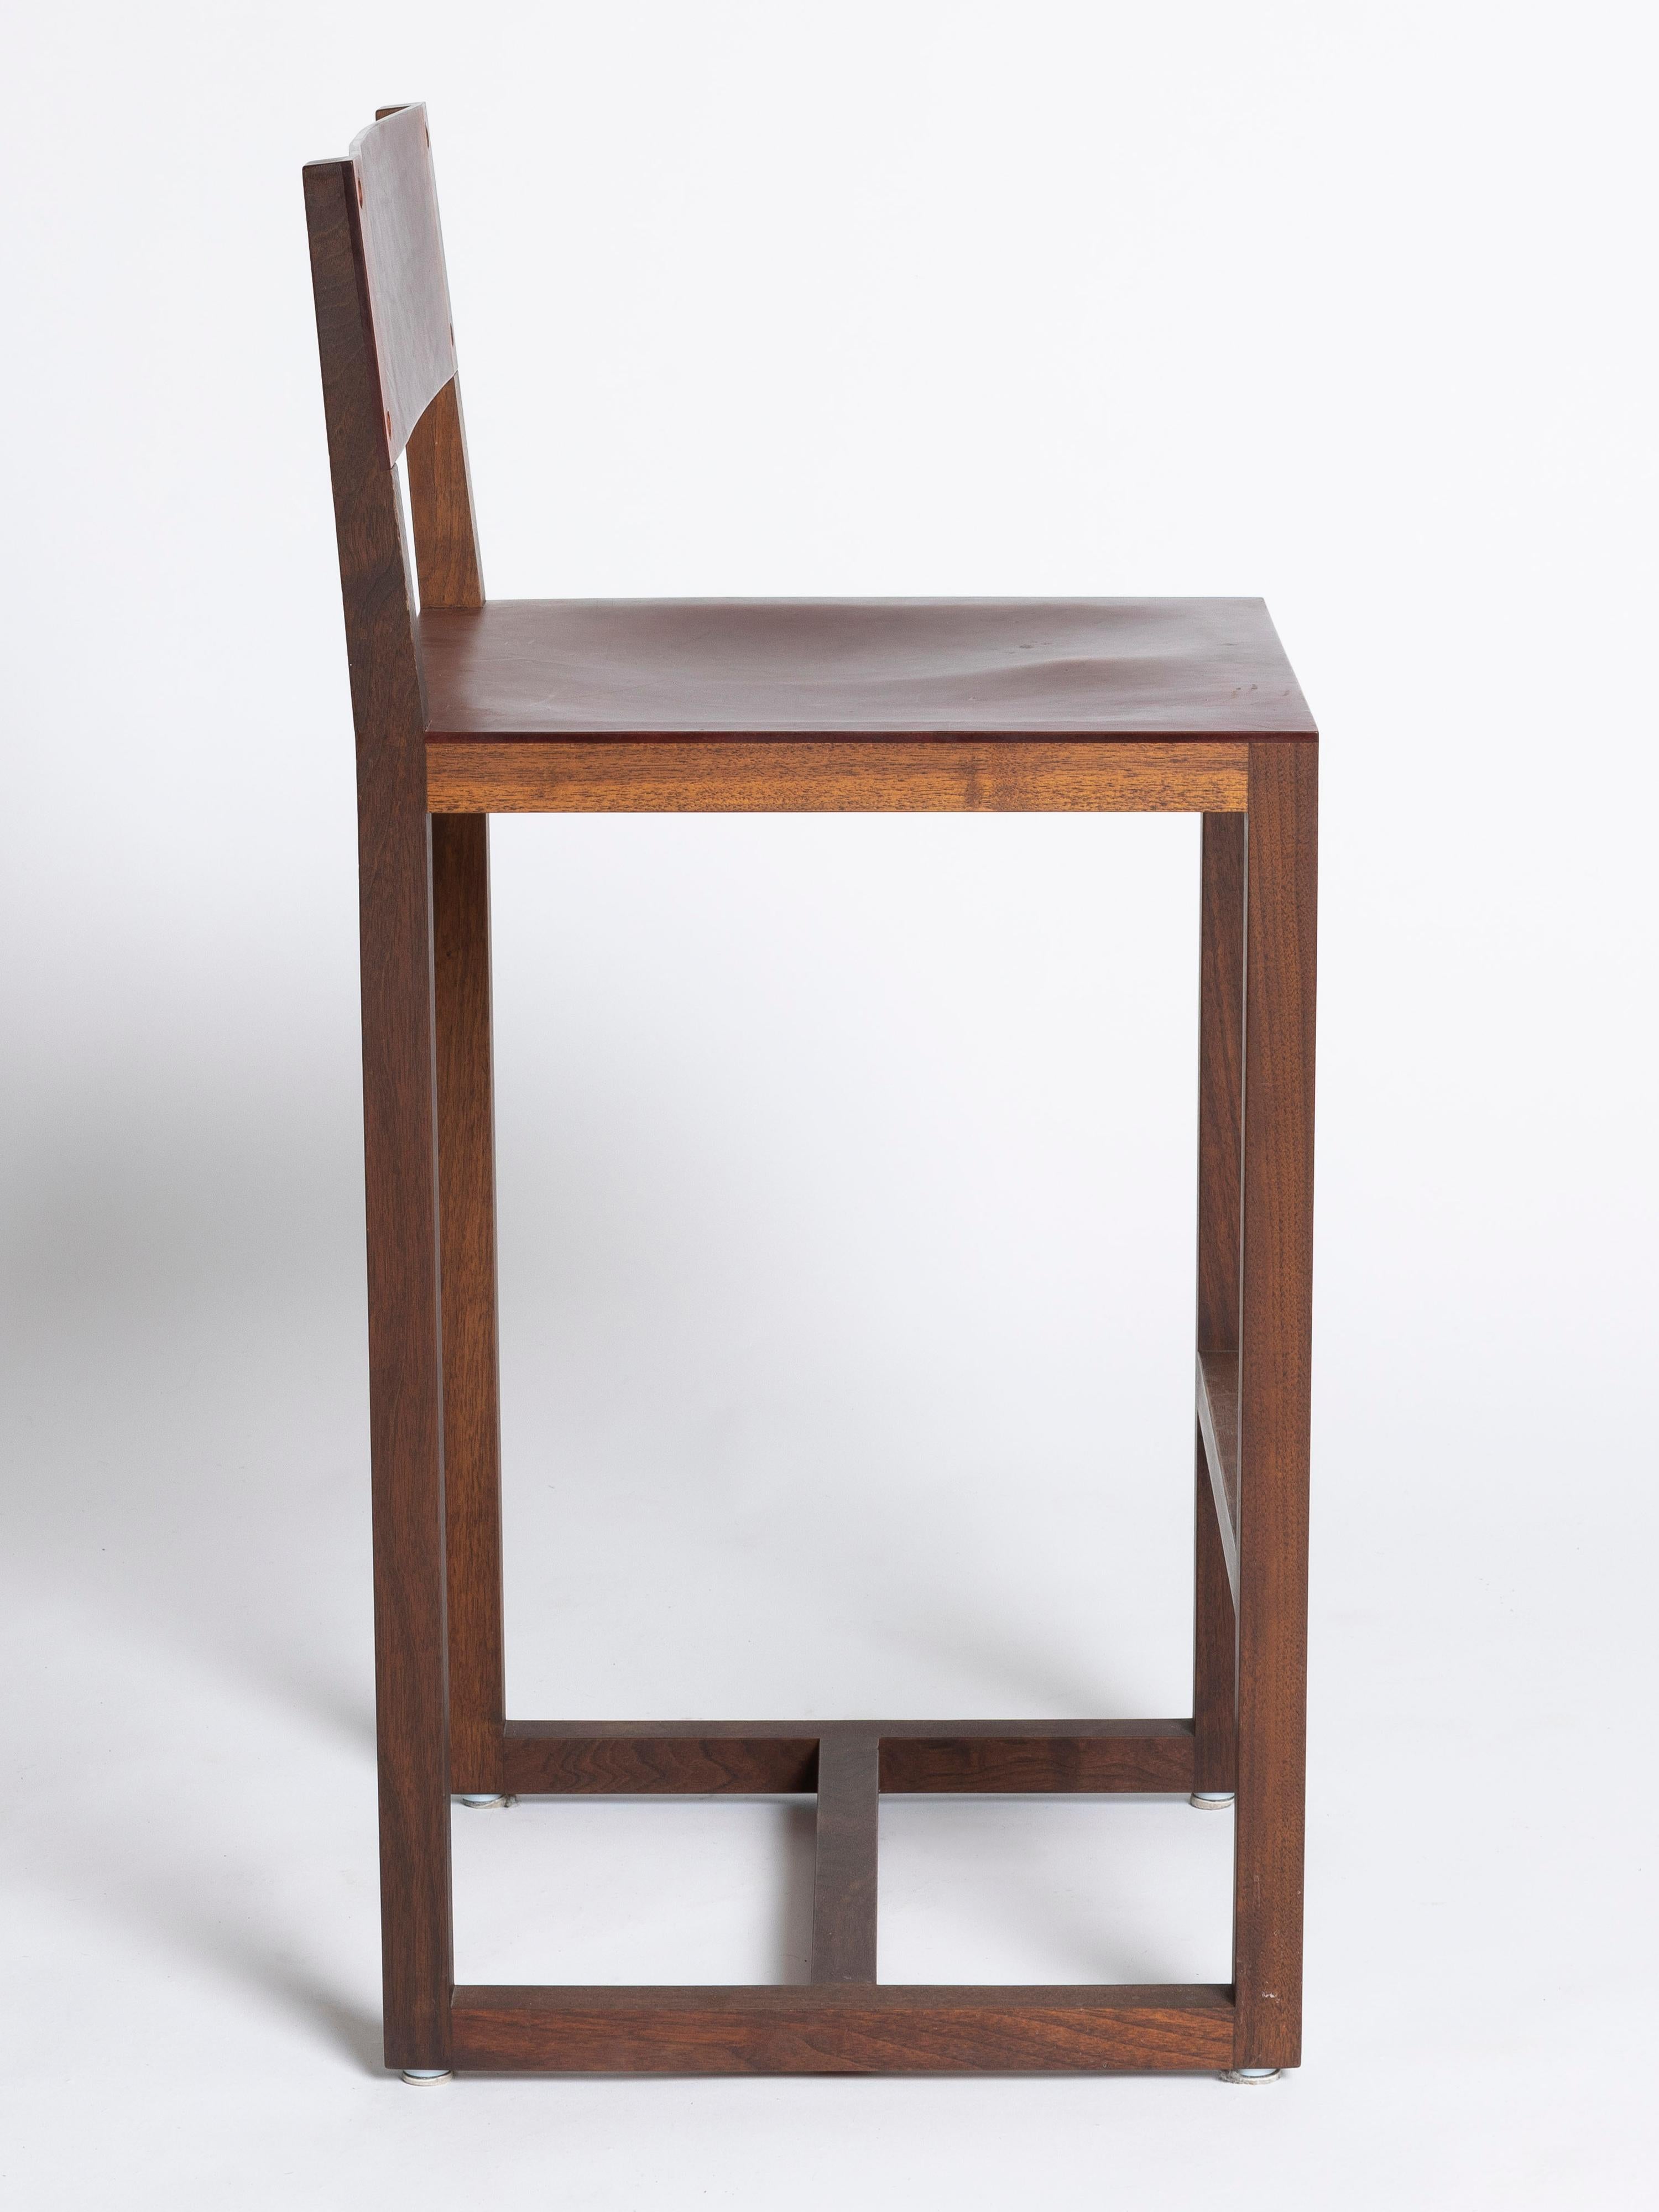 BDDW square guest counter height bar stools in walnut with brown leather seats and backs. Comfortable footrest. Two available. 

BDDW is a small American design and fabrication company dedicated to timeless design, expert craftsmanship and forward